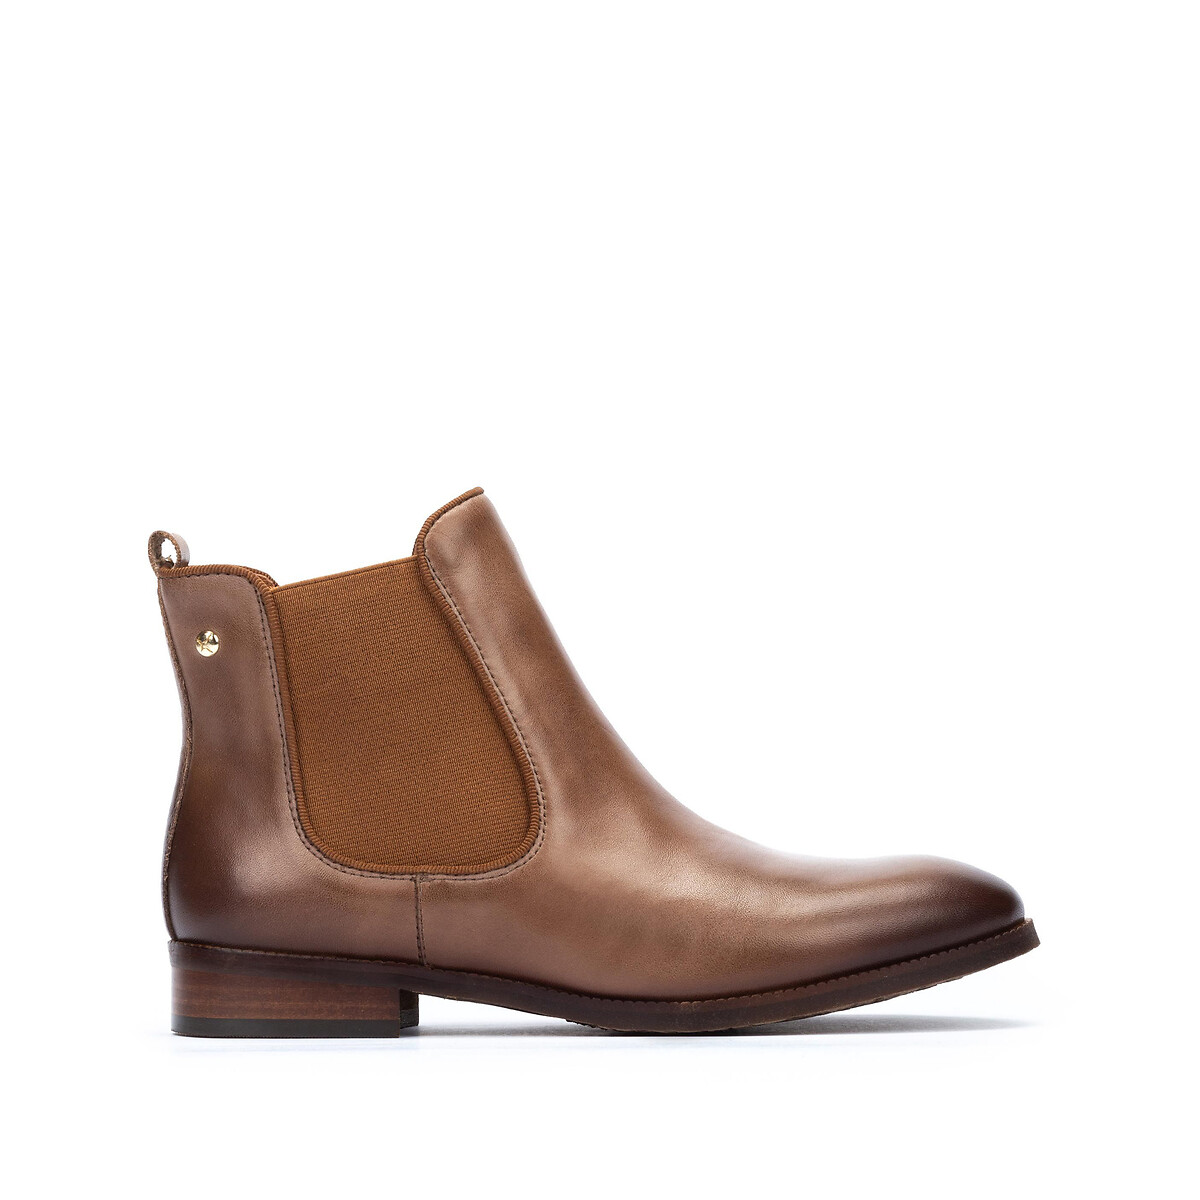 Royal Leather Chelsea Boots